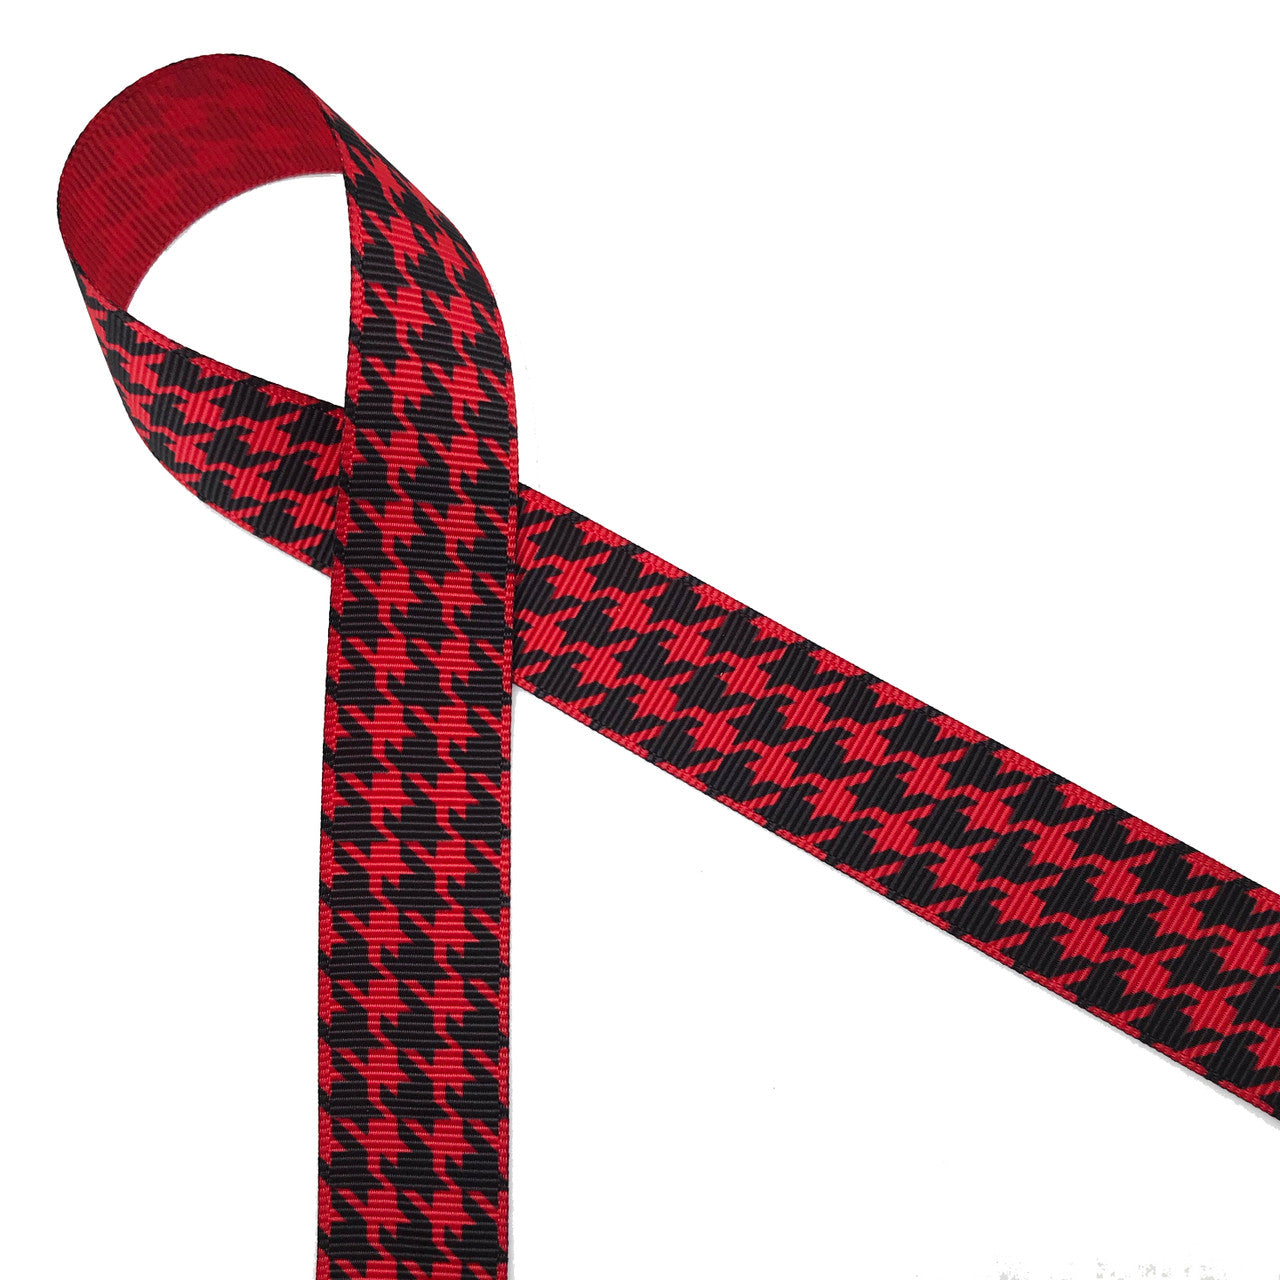 Houndstooth check in black printed on 1.5" red grosgrain ribbon is a classic print for Holidays and everyday use. This is an ideal ribbon for hair bows,  holiday gifts, wreath making, decorating and sewing projects! Our ribbon is designed and printed in the USA